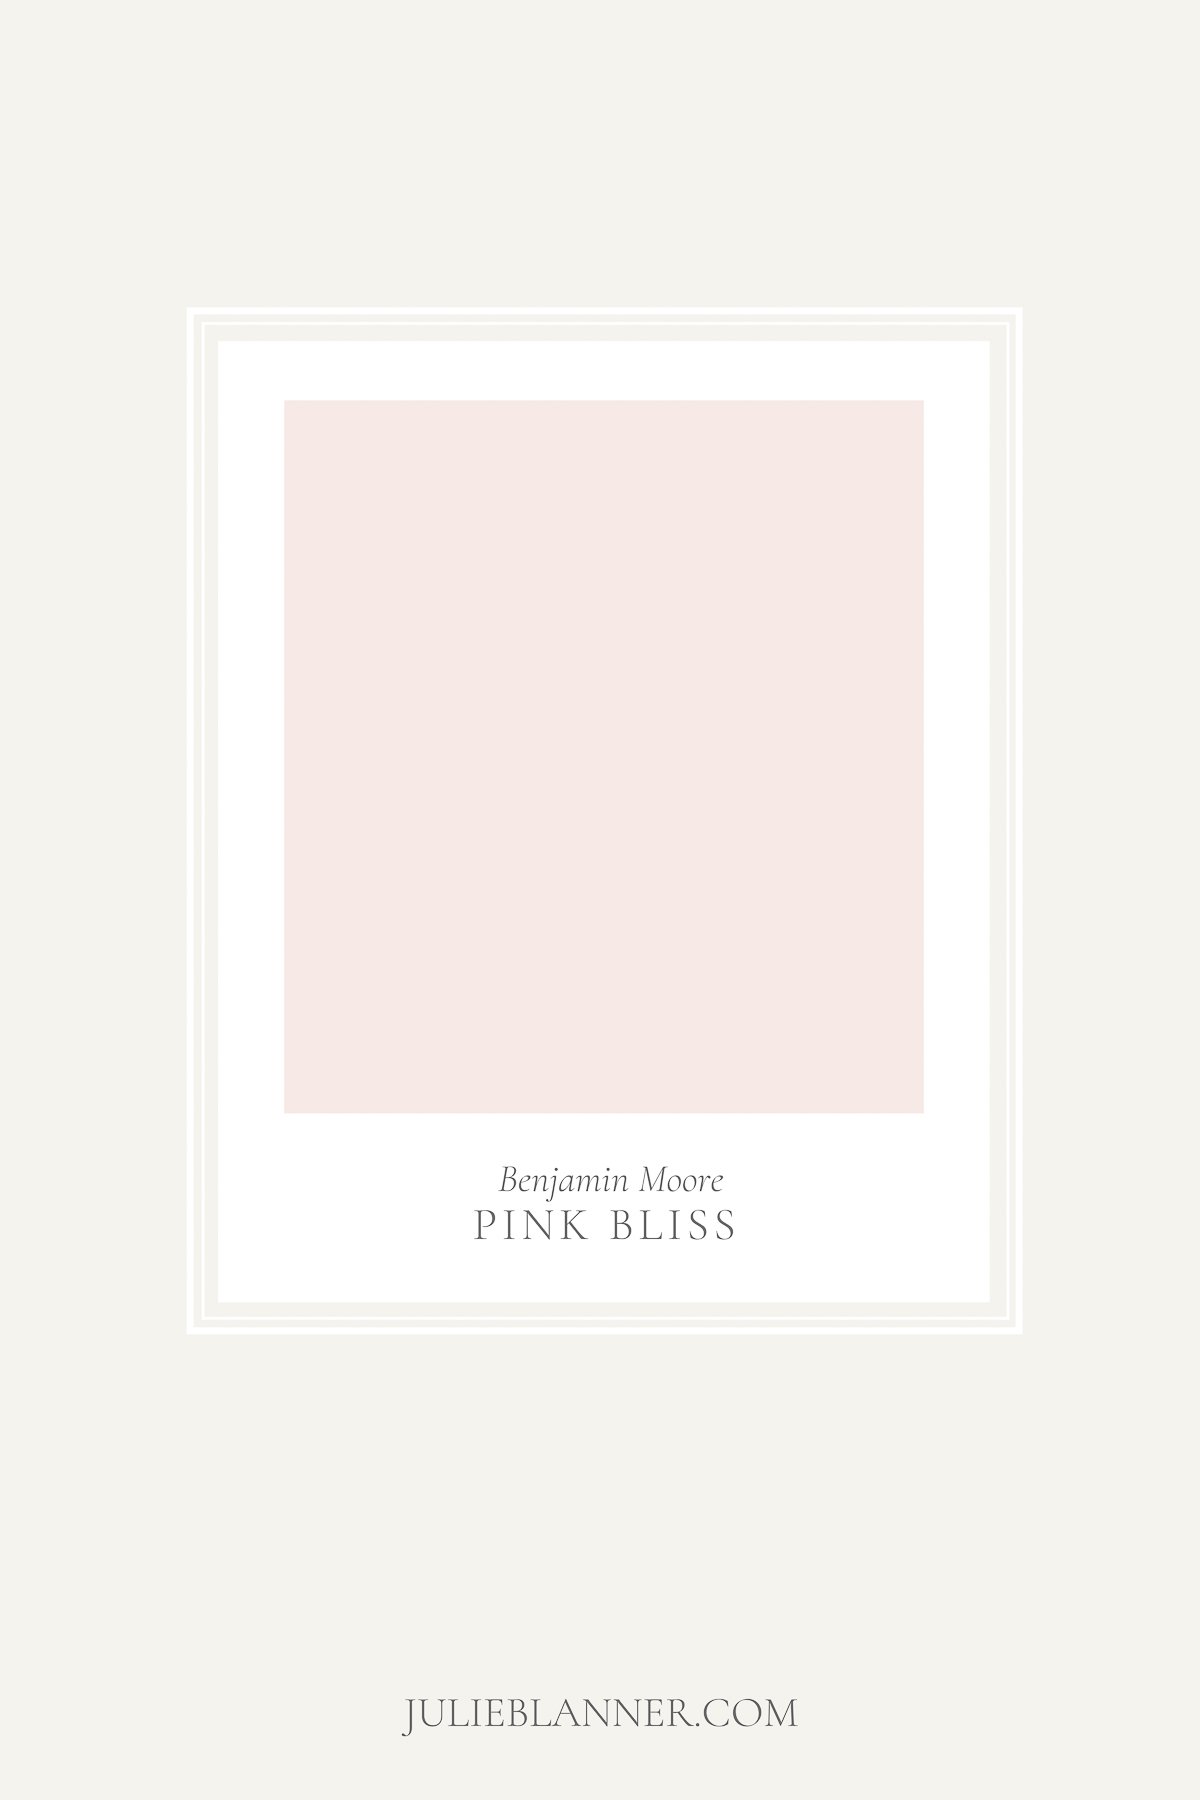 A paint sample card of Benjamin Moore Pink Bliss, as part of a blush pink paint guide.